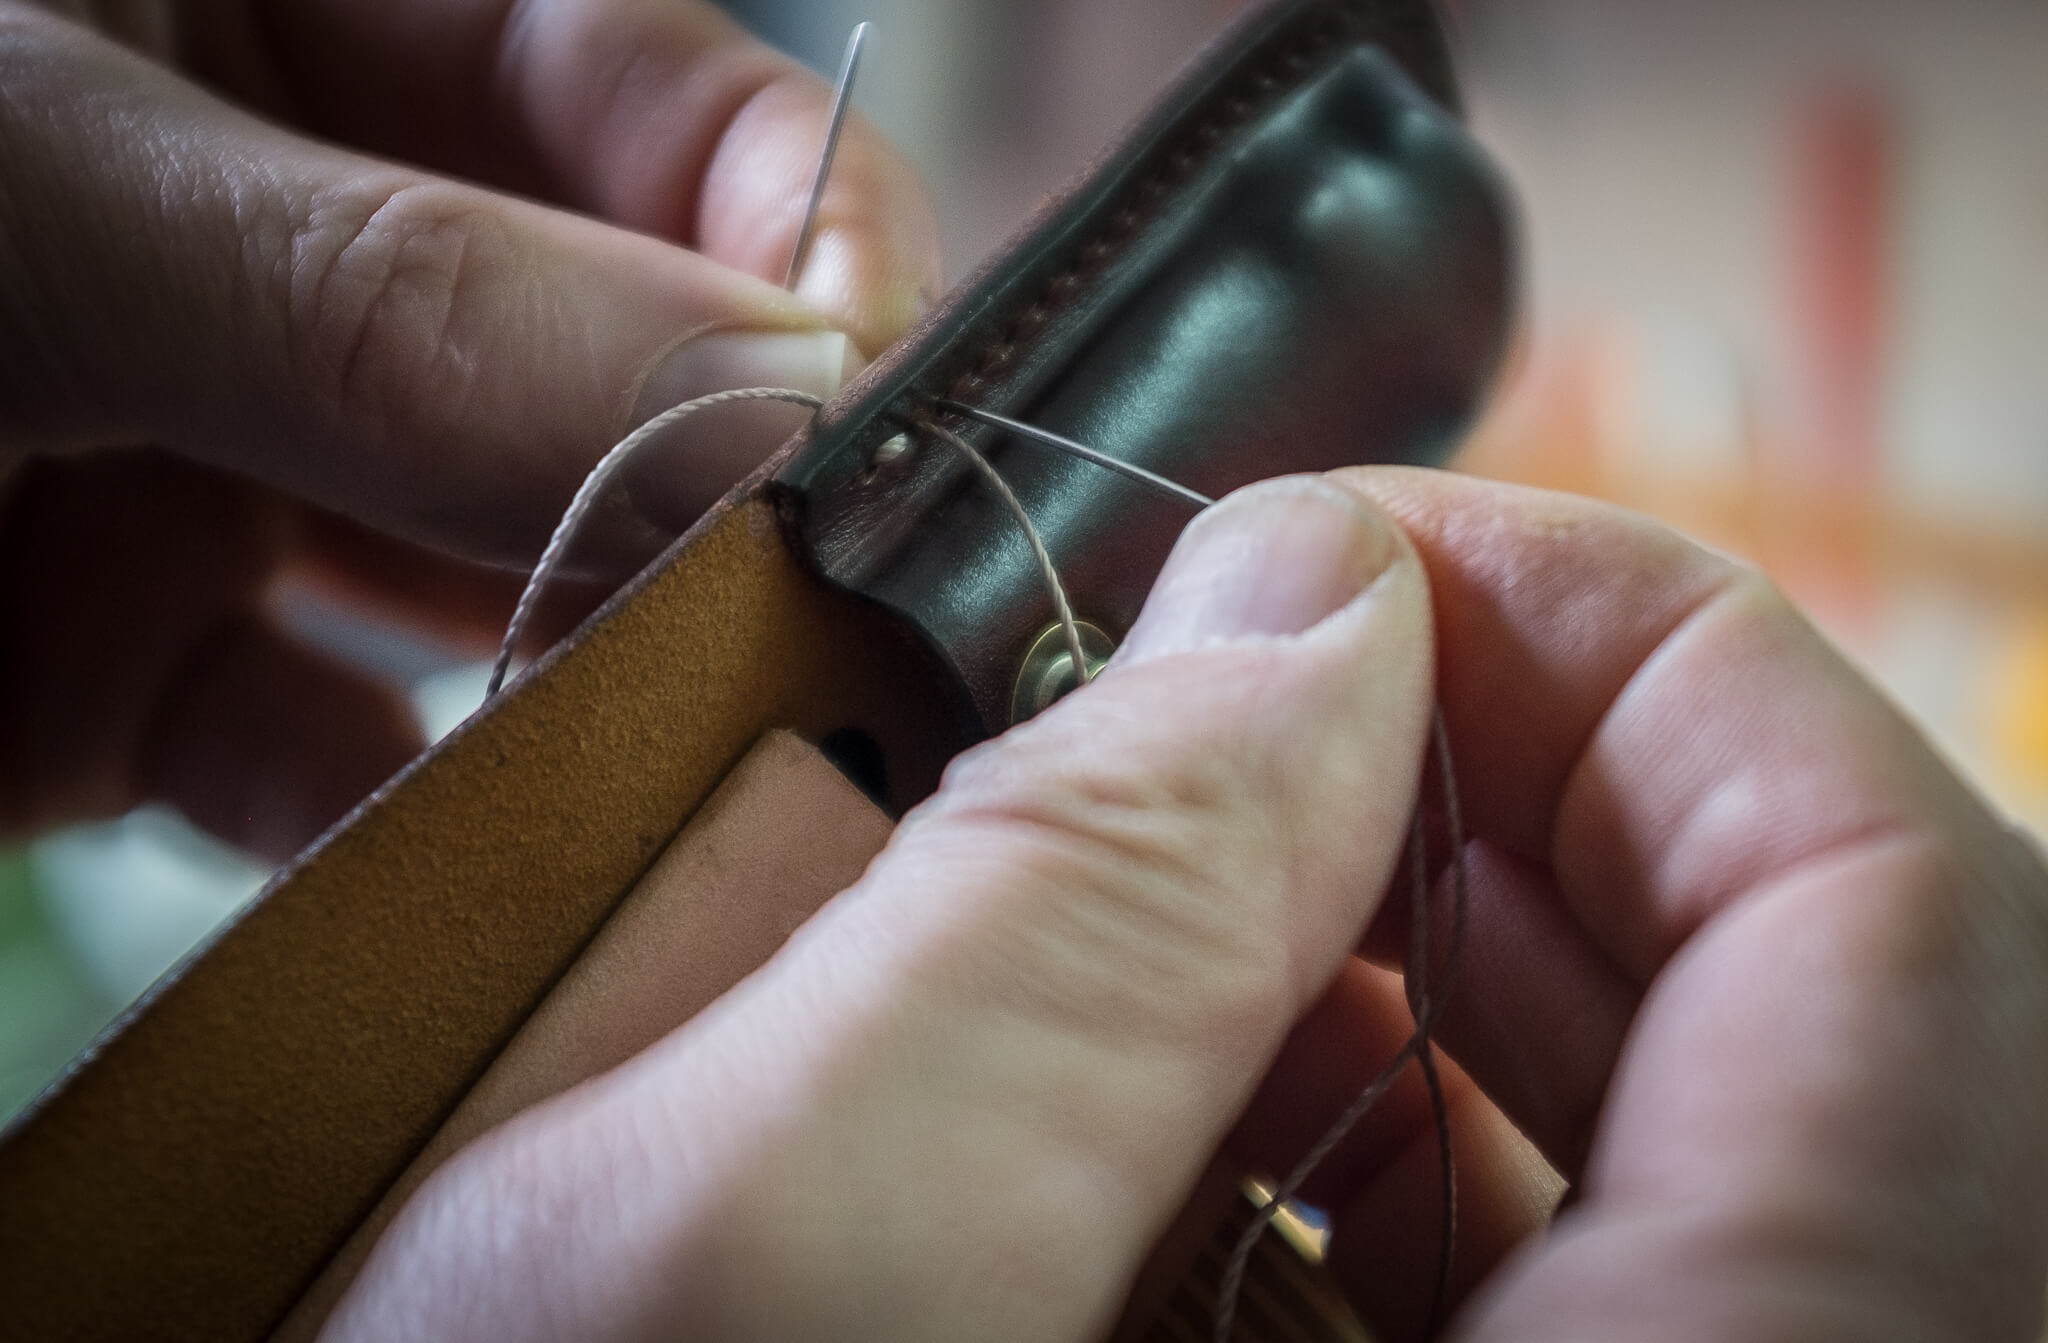 Handstitching the leather knife sheath | Duke & Sons Leather